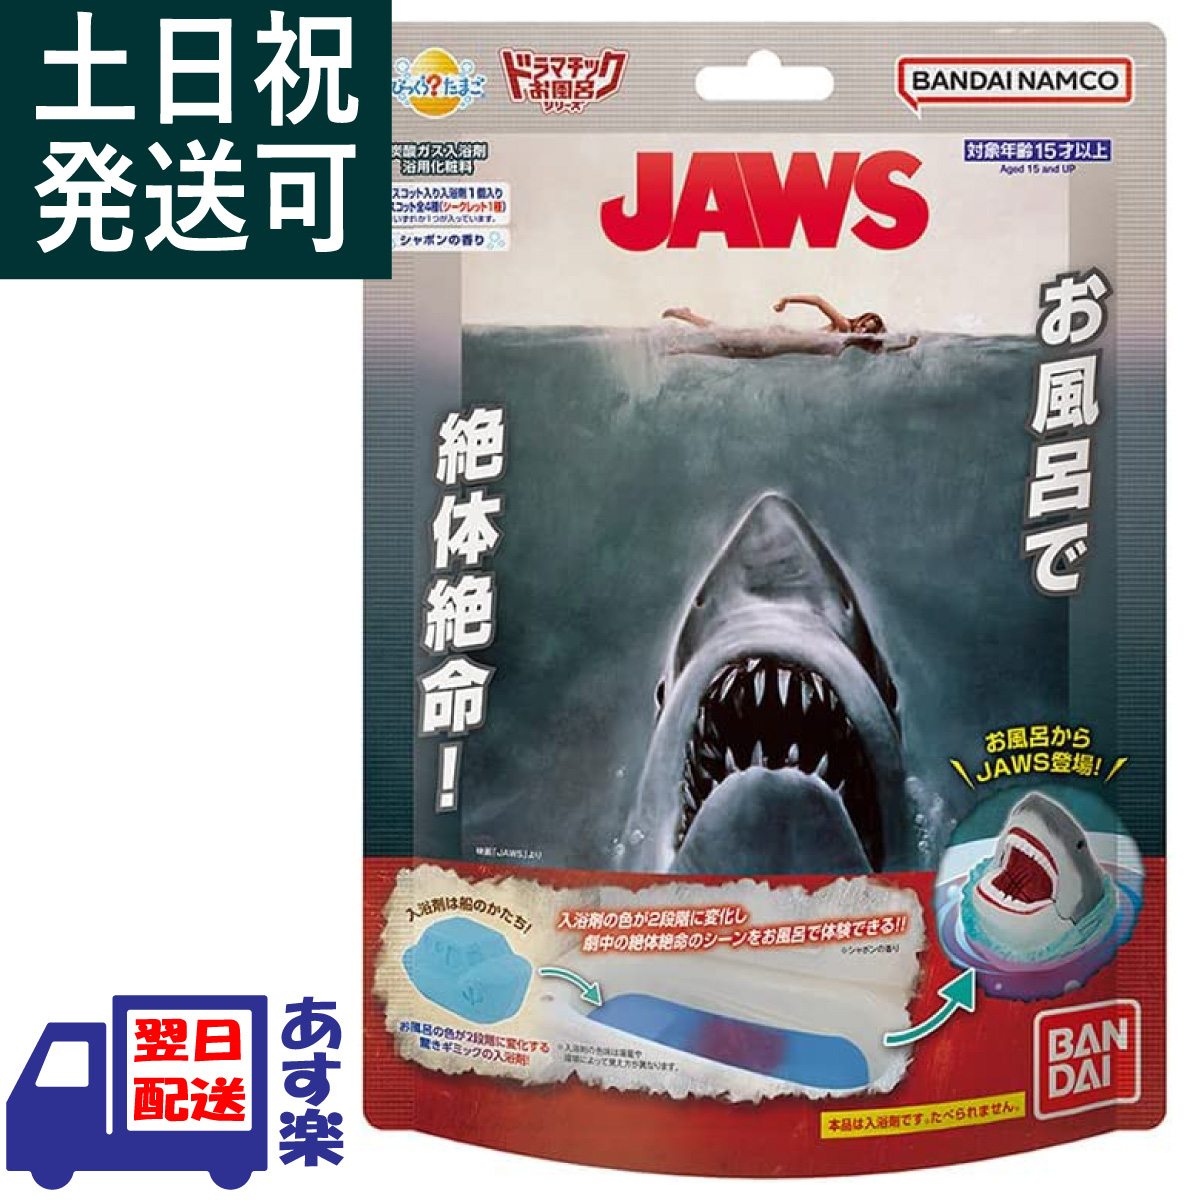 JAWS ジョーズ バスボール バスボム time2outsource.com.au